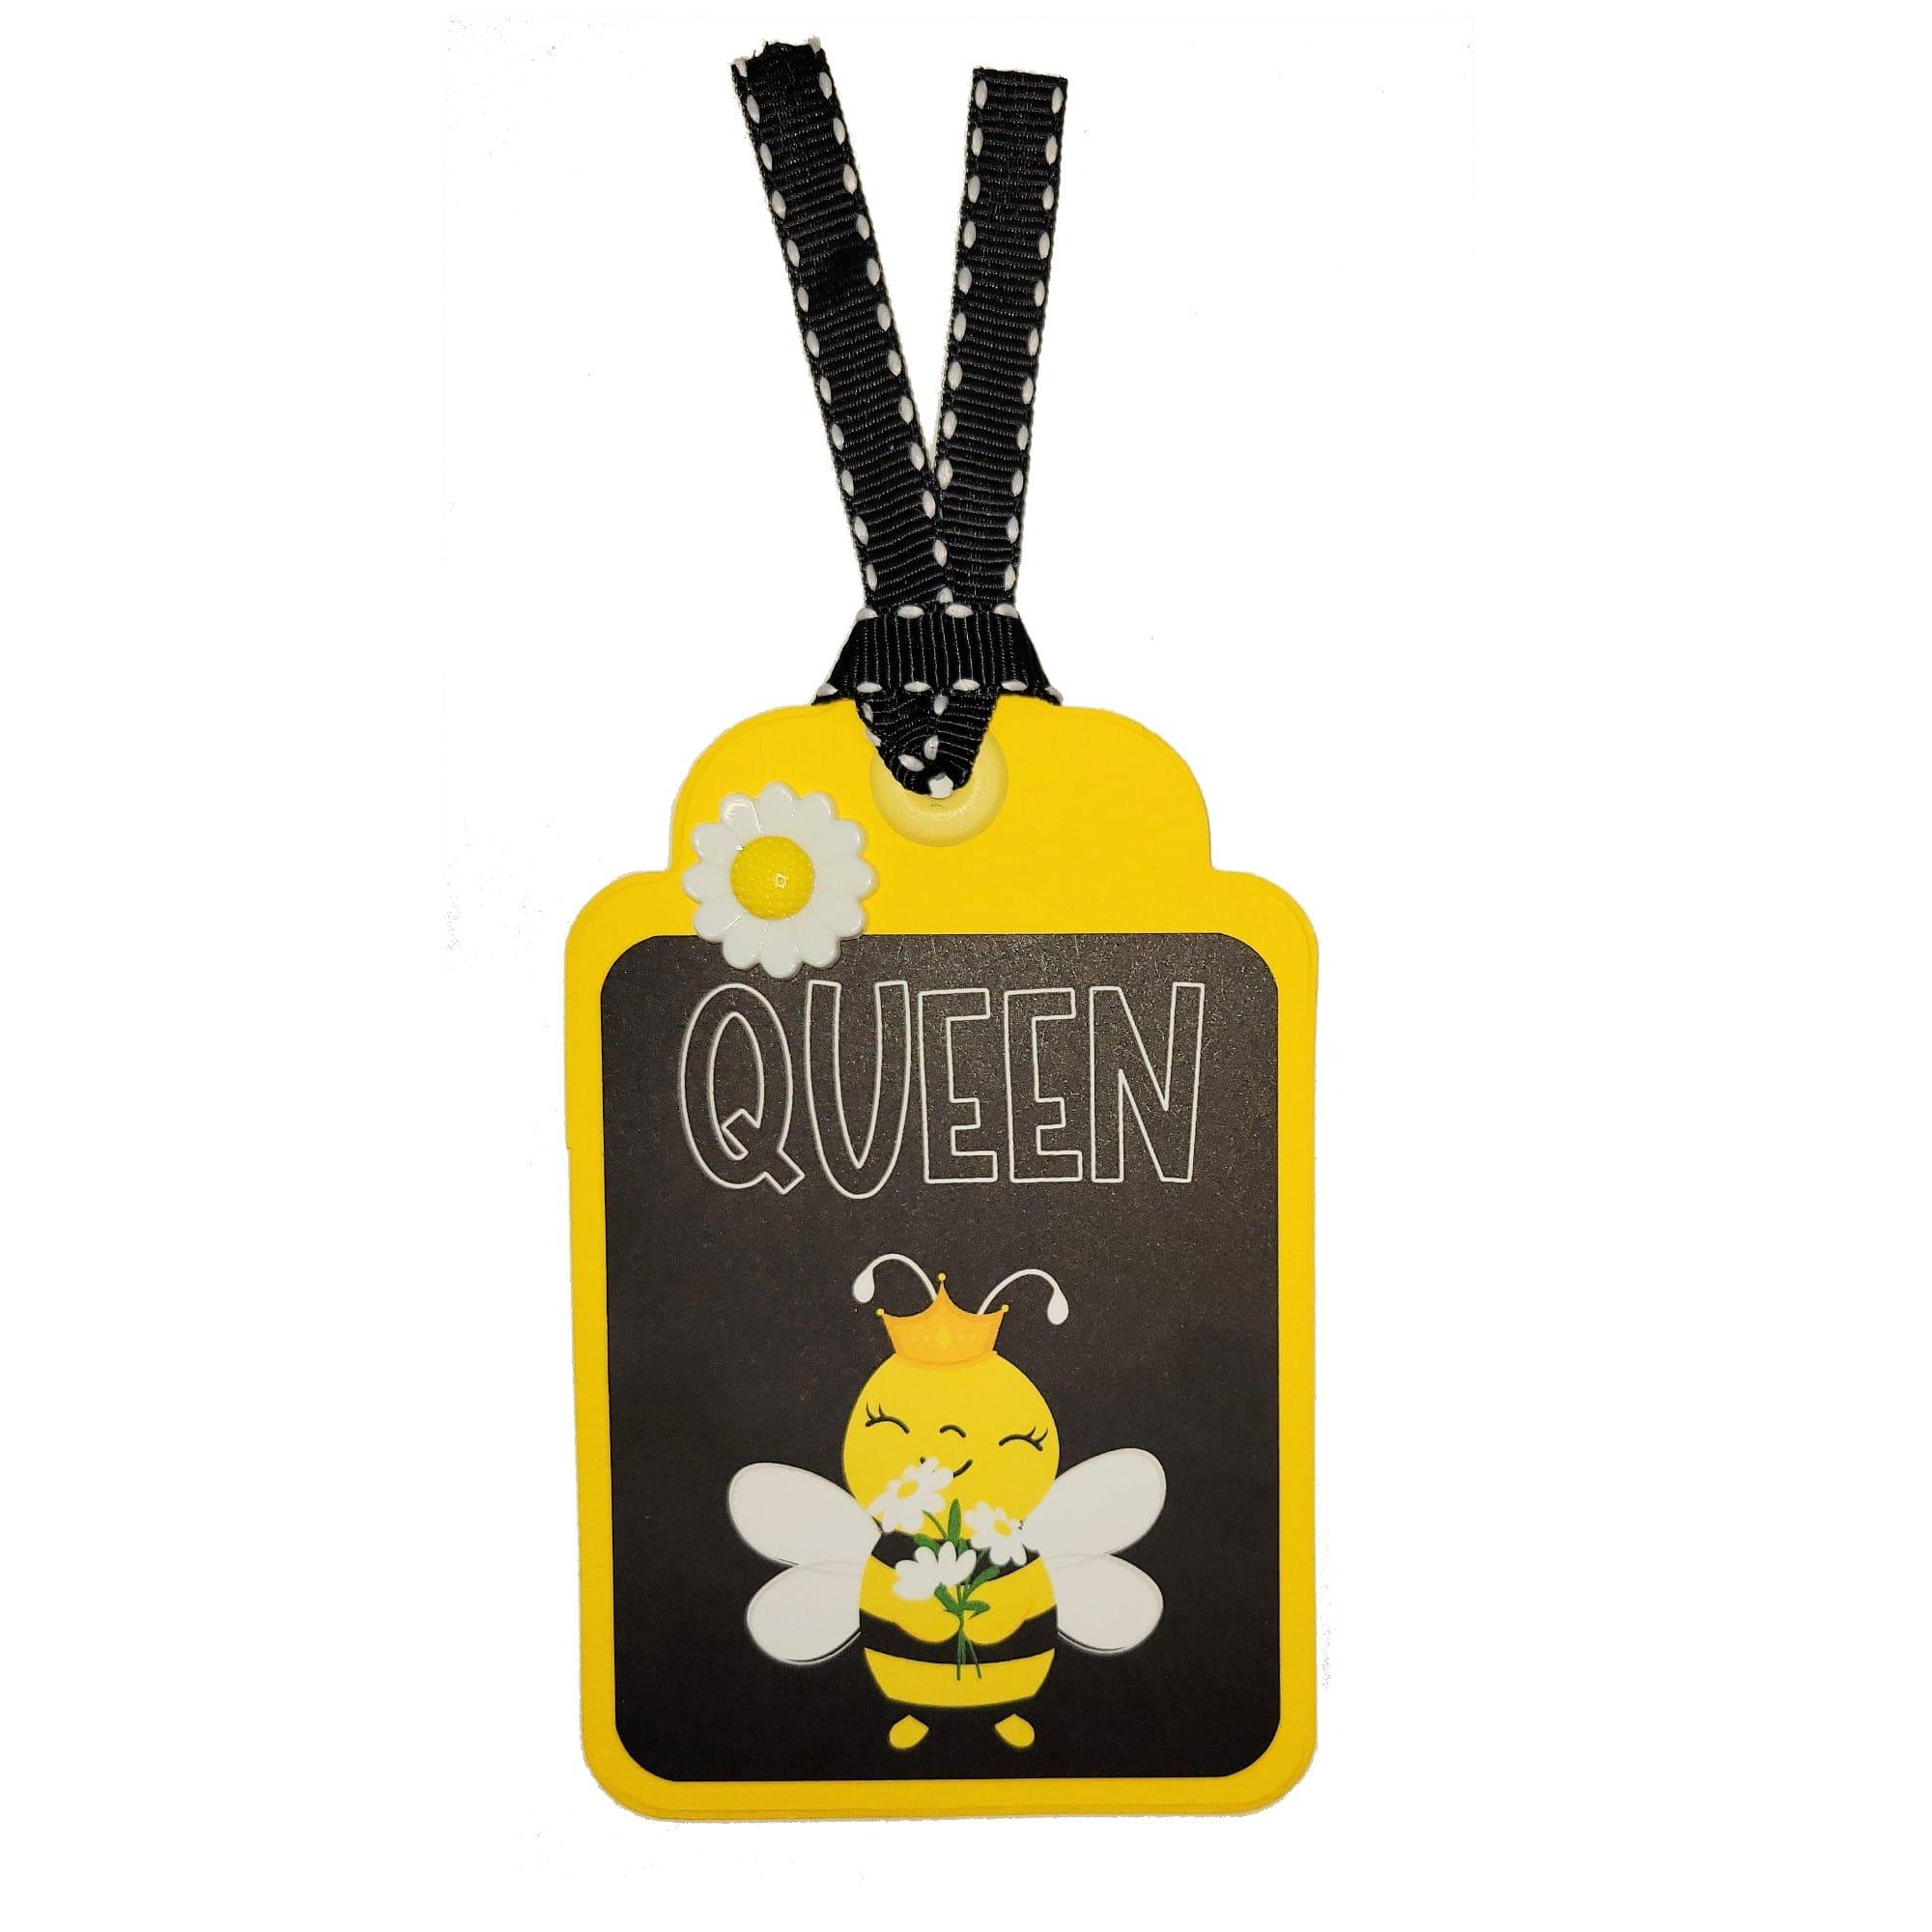 Honey Bee Collection Queen Bee 3 x 4 Scrapbook Tag Embellishment by SSC Designs